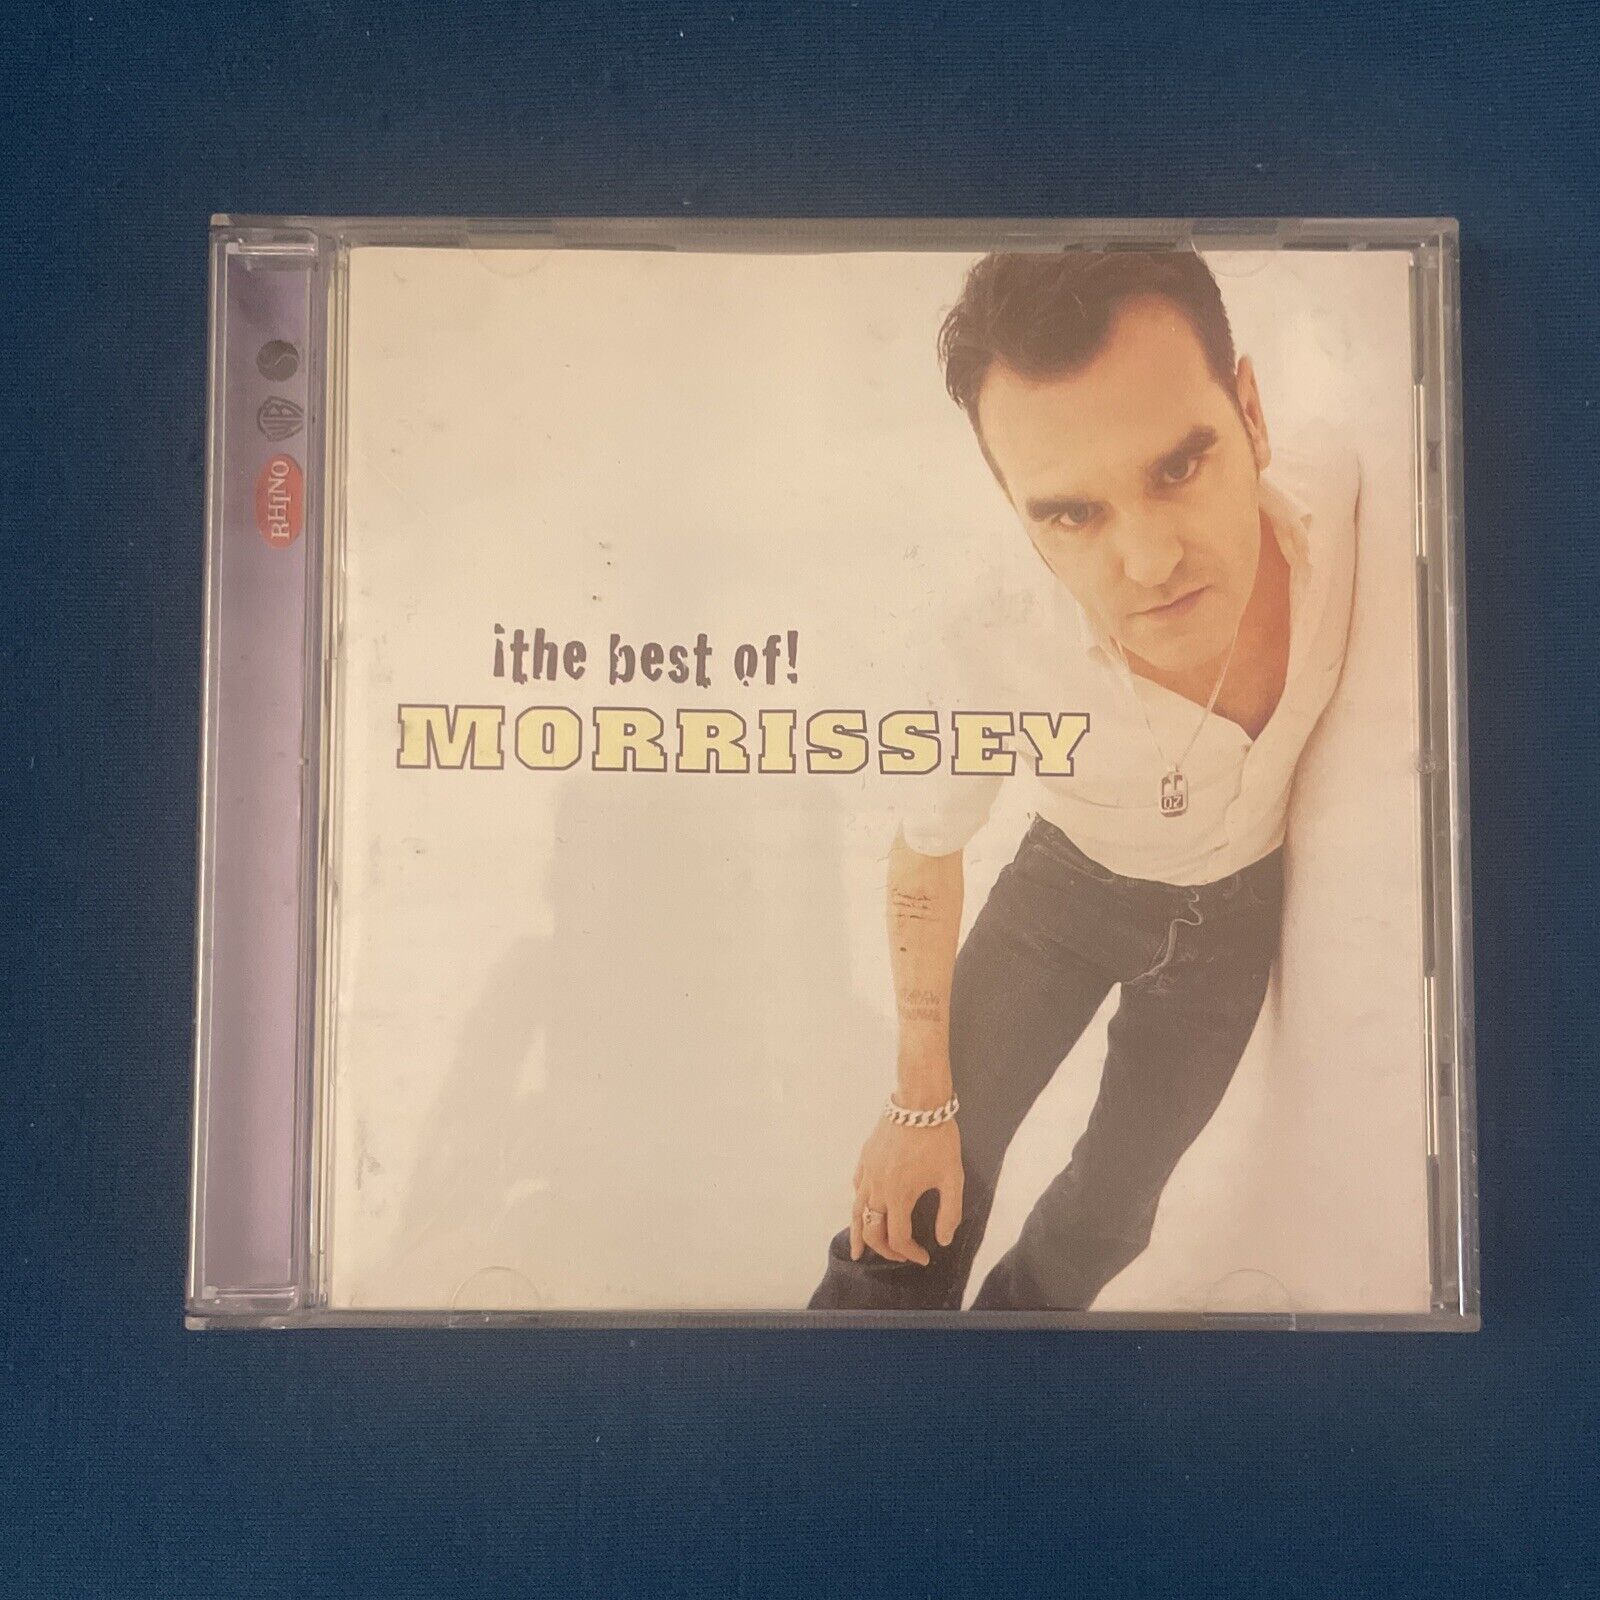 The Best Of Morrissey by Morrissey (CD, 2001, Rhino/WB) Alternative Rock CD